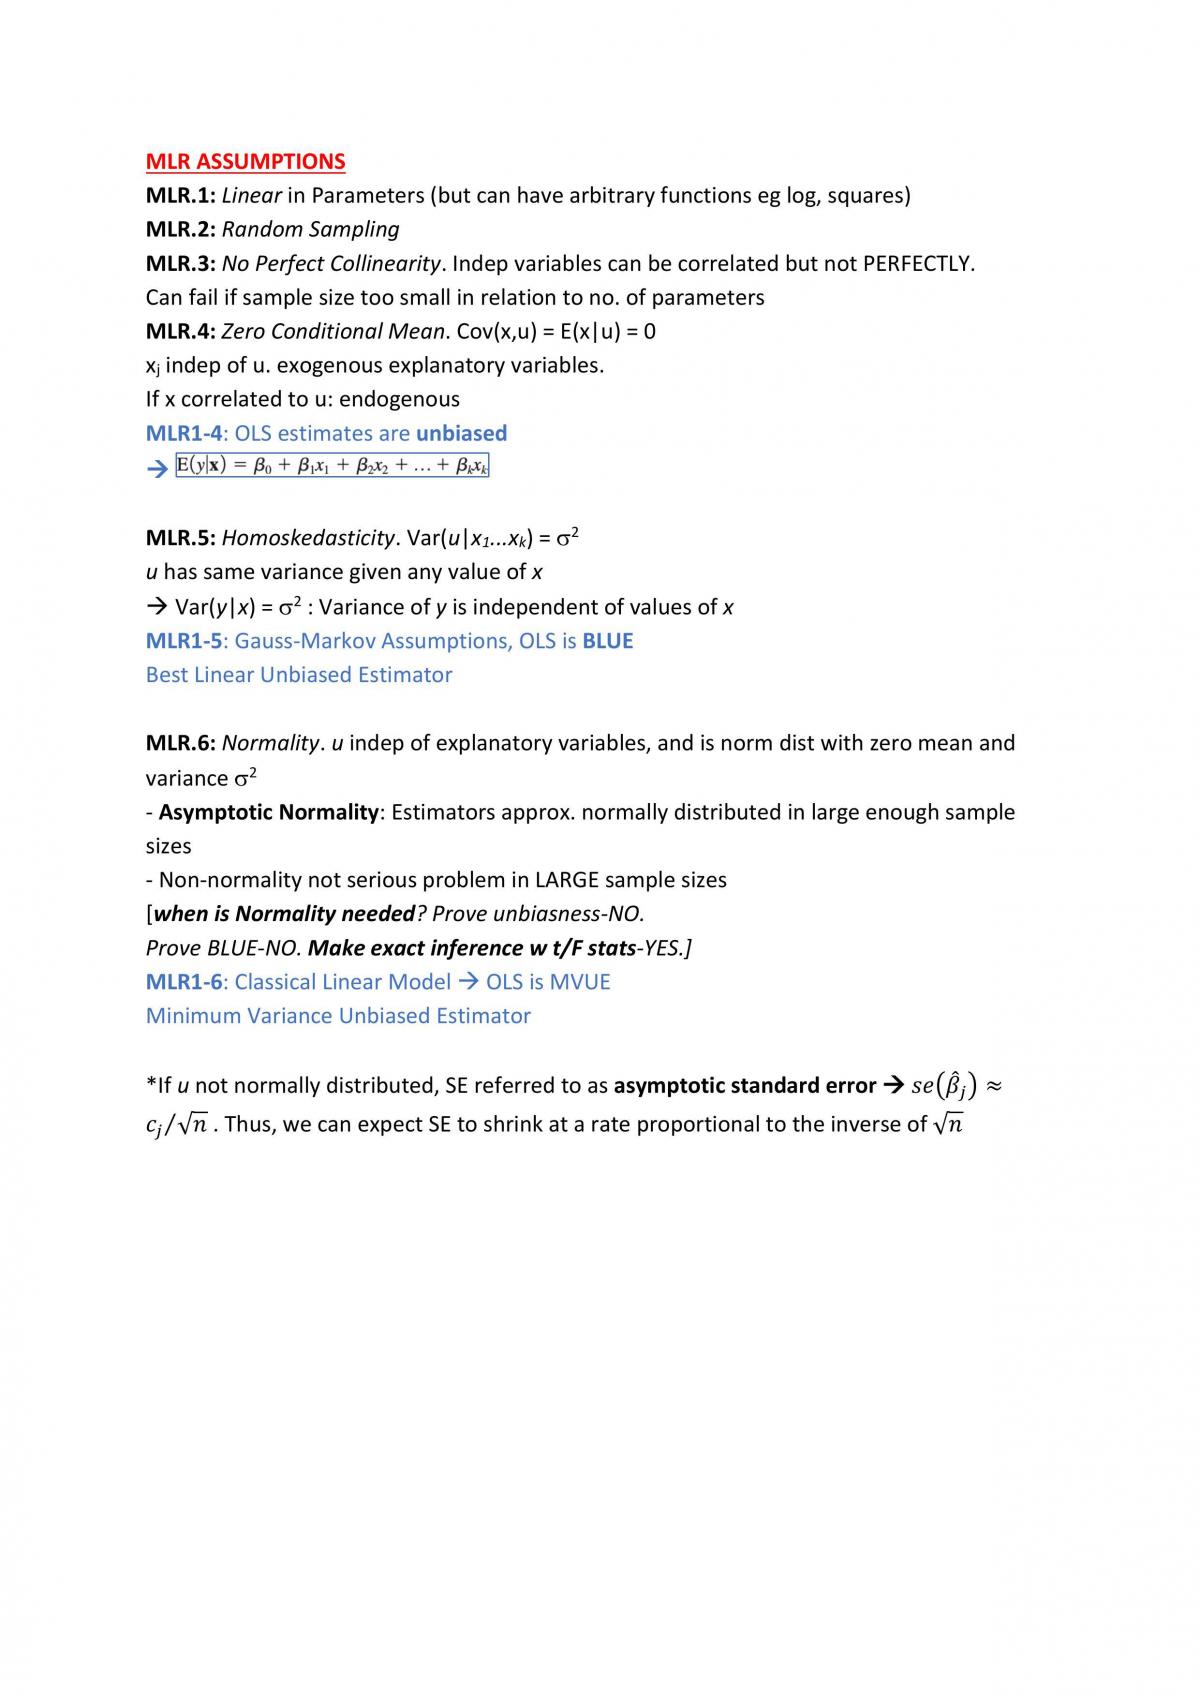 BSE3703 - Econometrics for Business I - Page 3